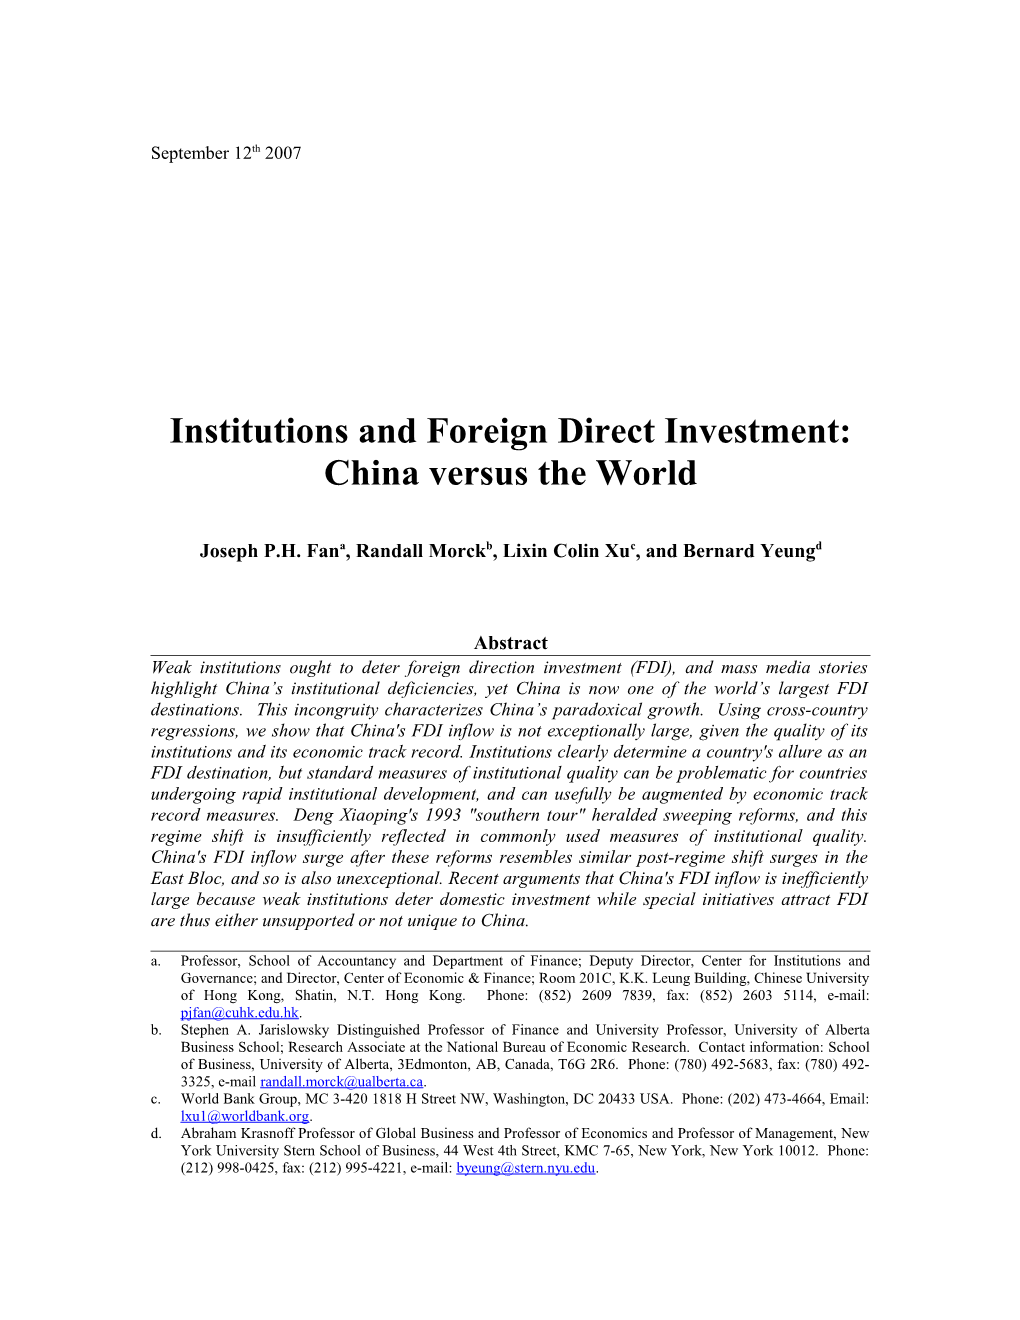 Institutions and Foreign Direct Investment: China Versus the World